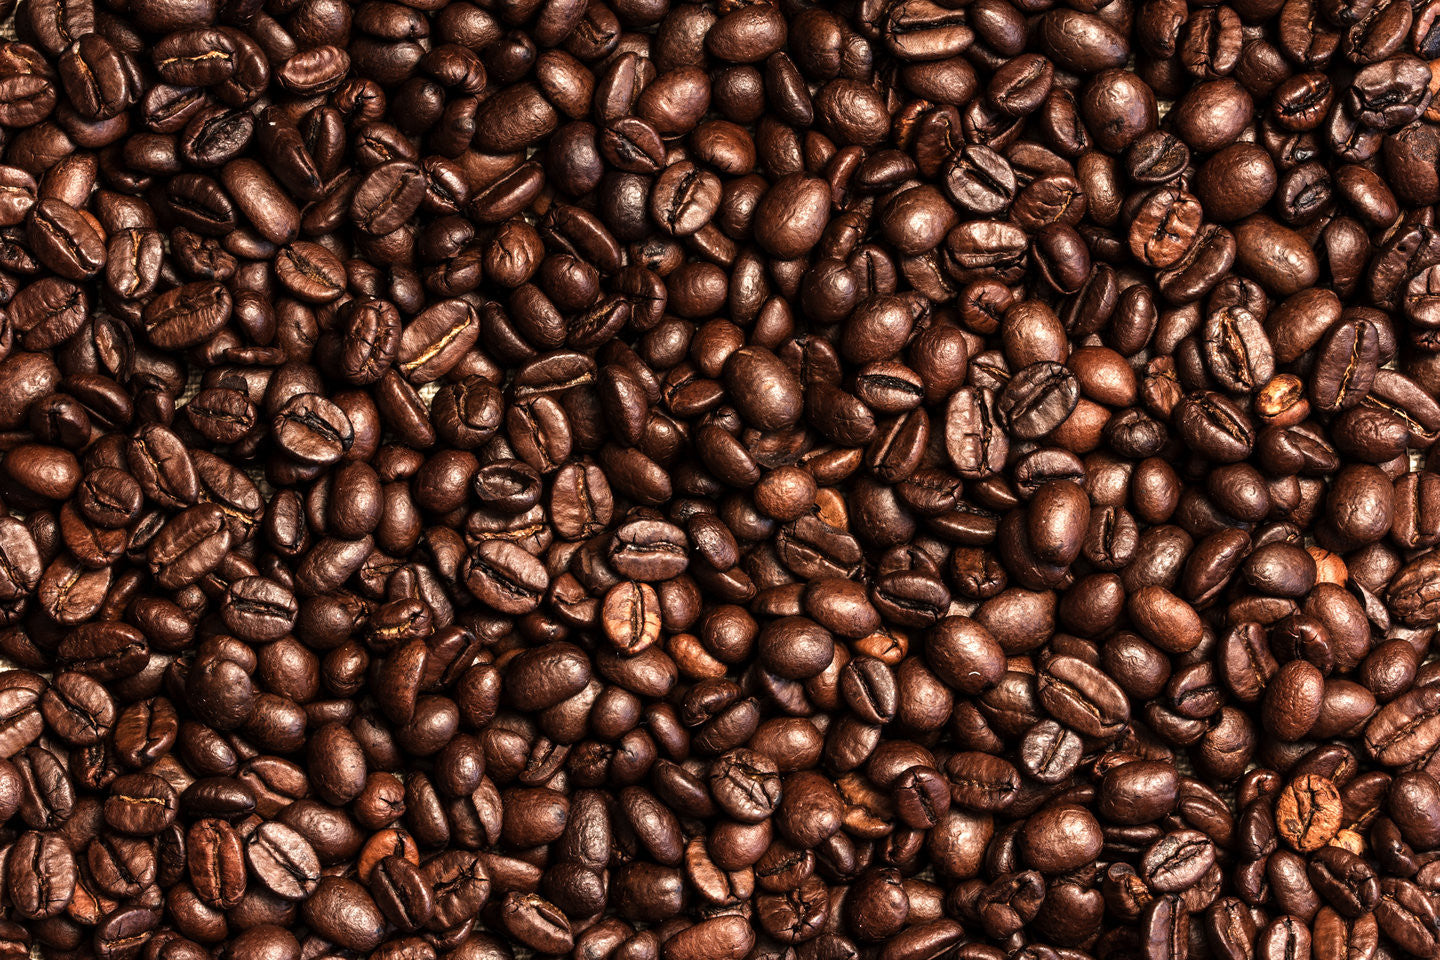 Today we take a look at Ethiopian Sidamo coffee beans